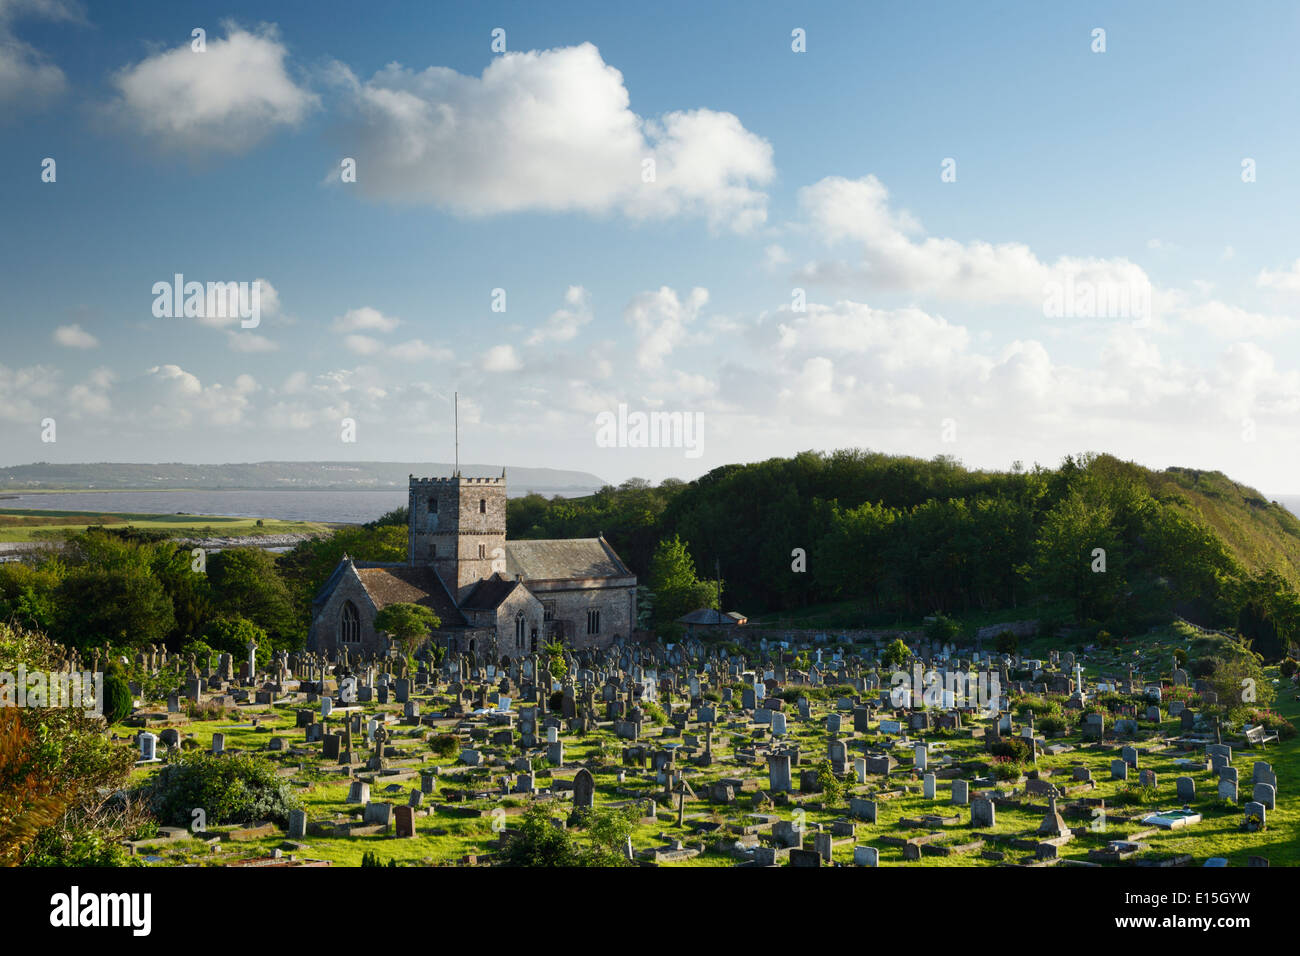 St Andrew's Church, Clevedon. North Somerset. England. UK. Stock Photo